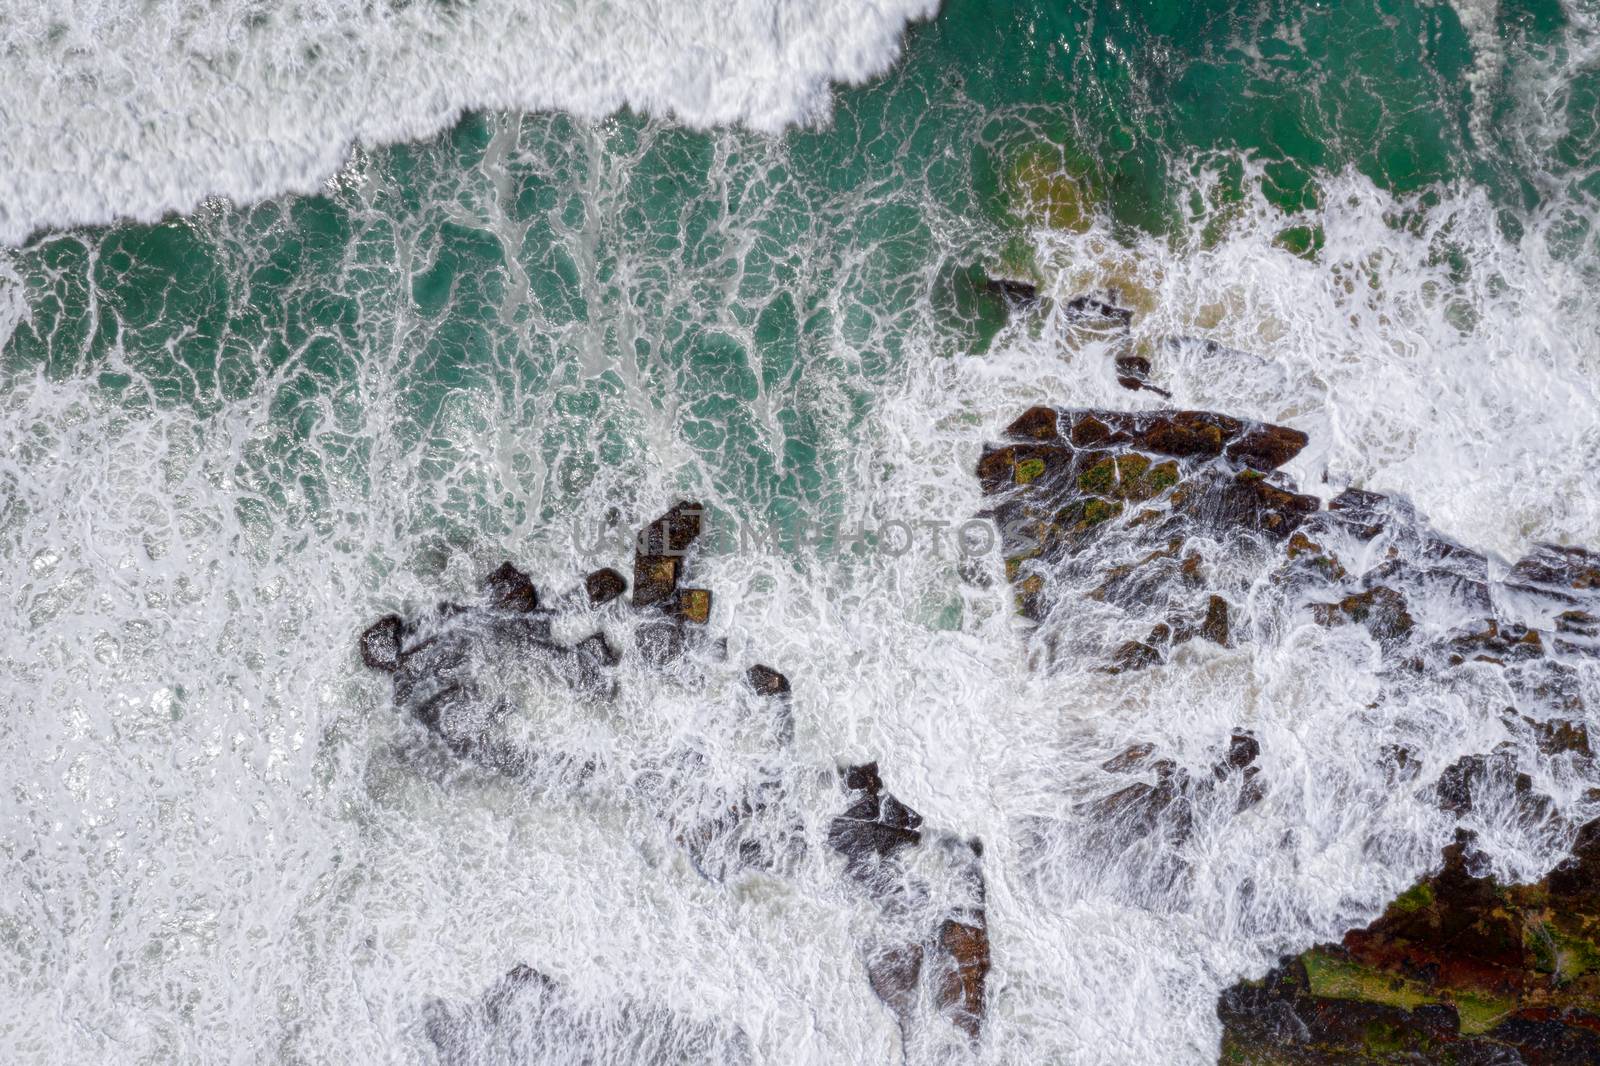 Wave action over rocks, motion in water. Rocks eroded into patterns, some with green moss and algae. Aerial perspective